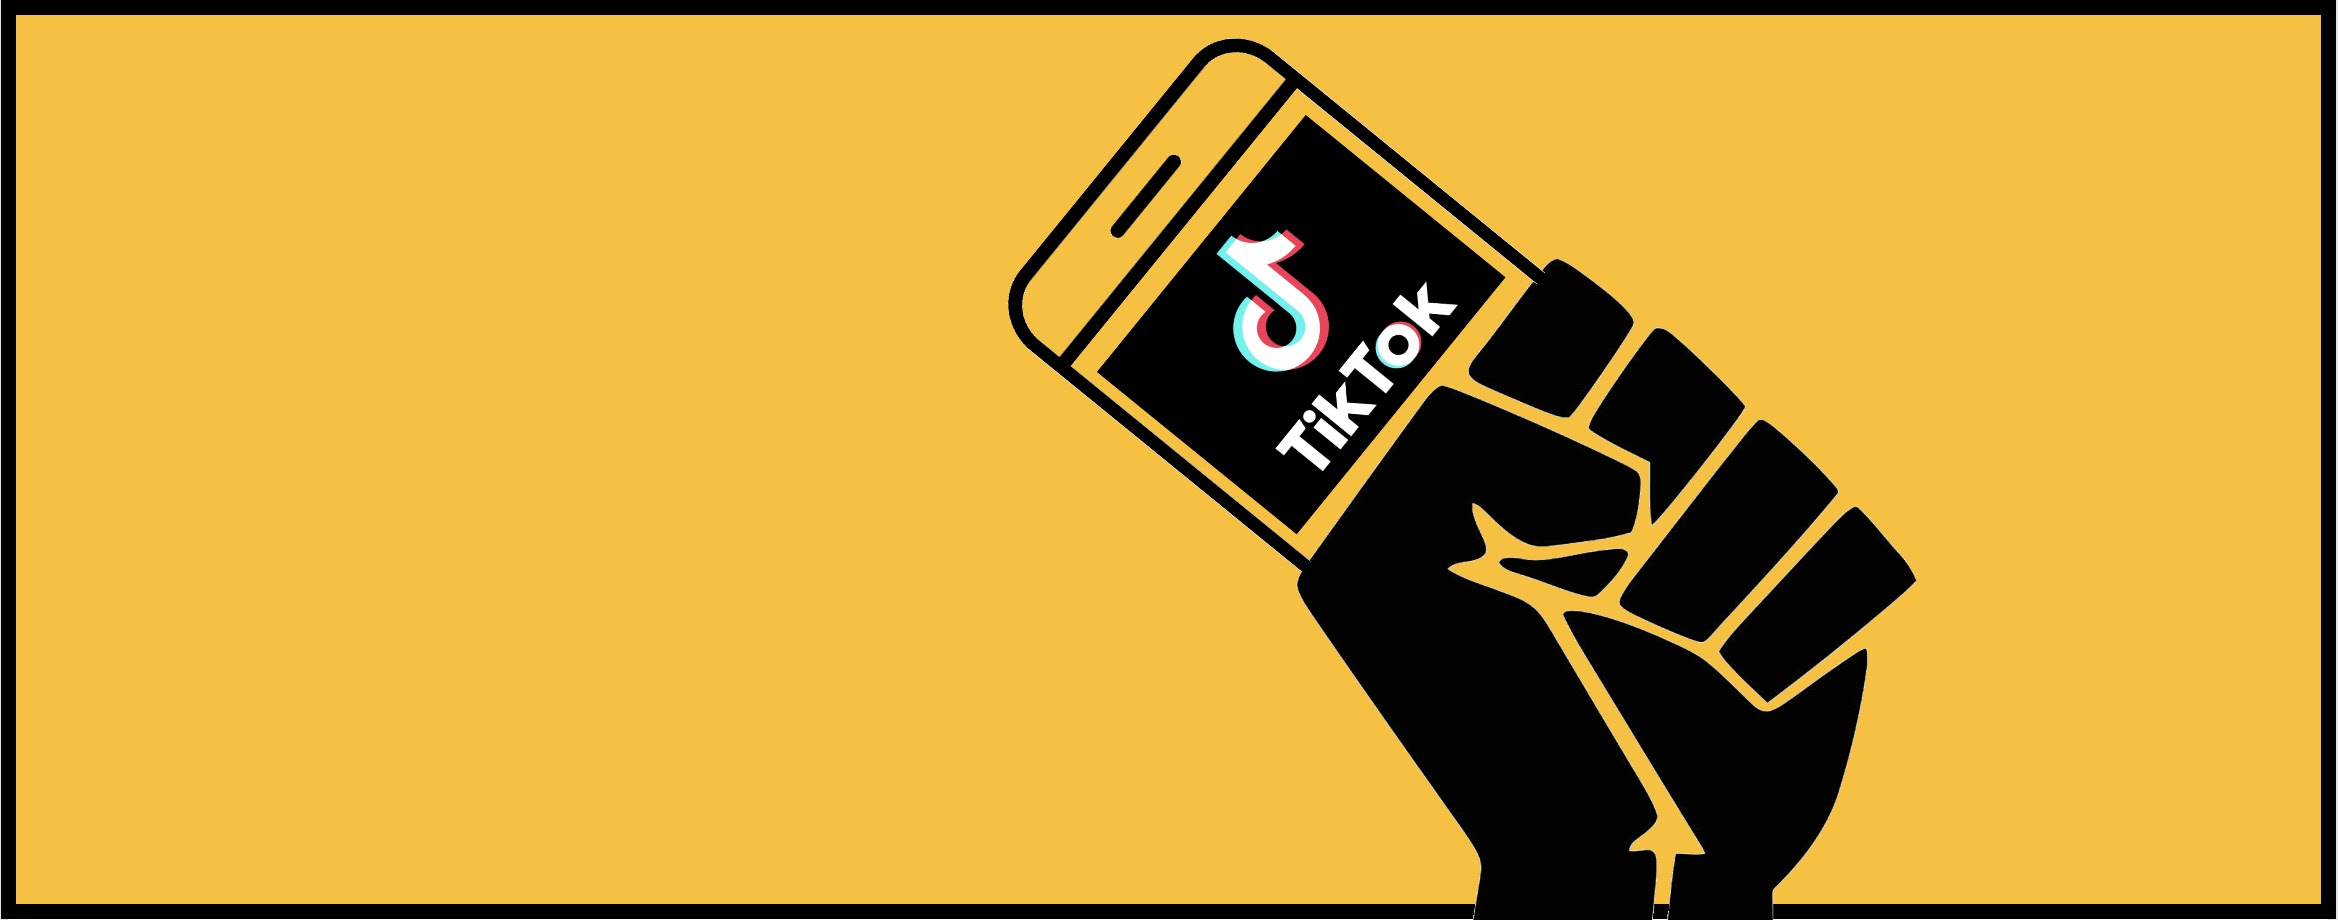 How to use TikTok in your campaign